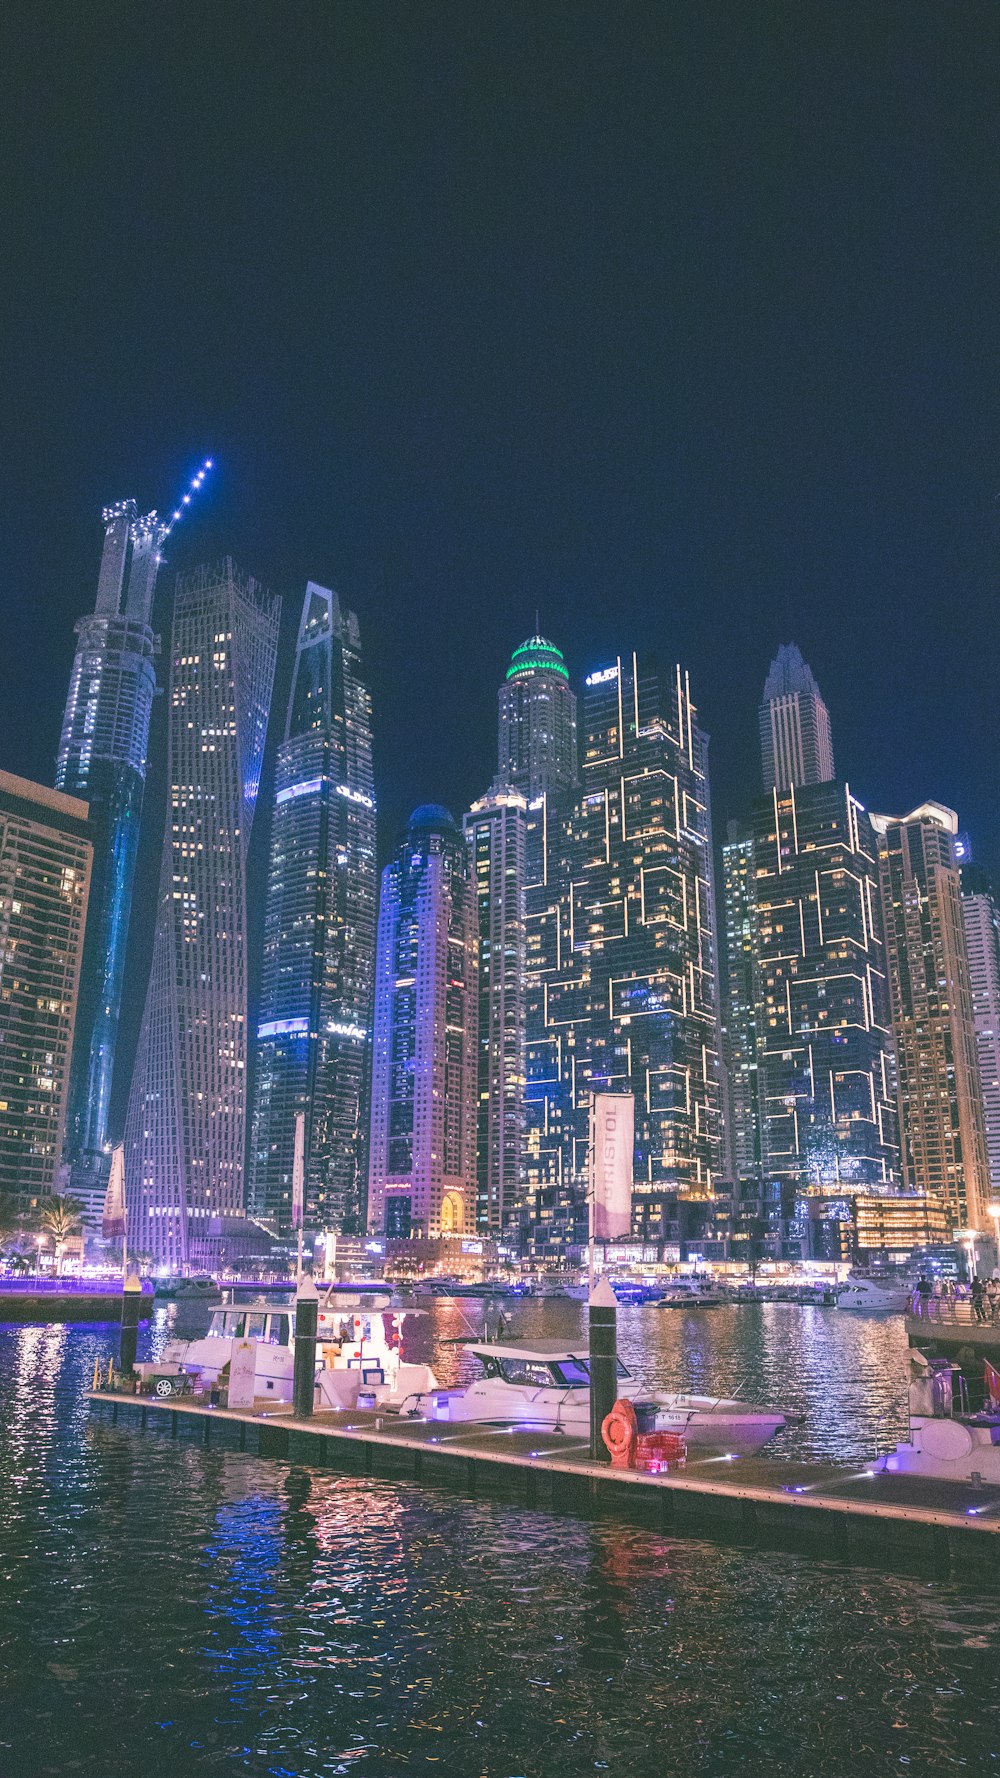 a city skyline at night with boats in the water